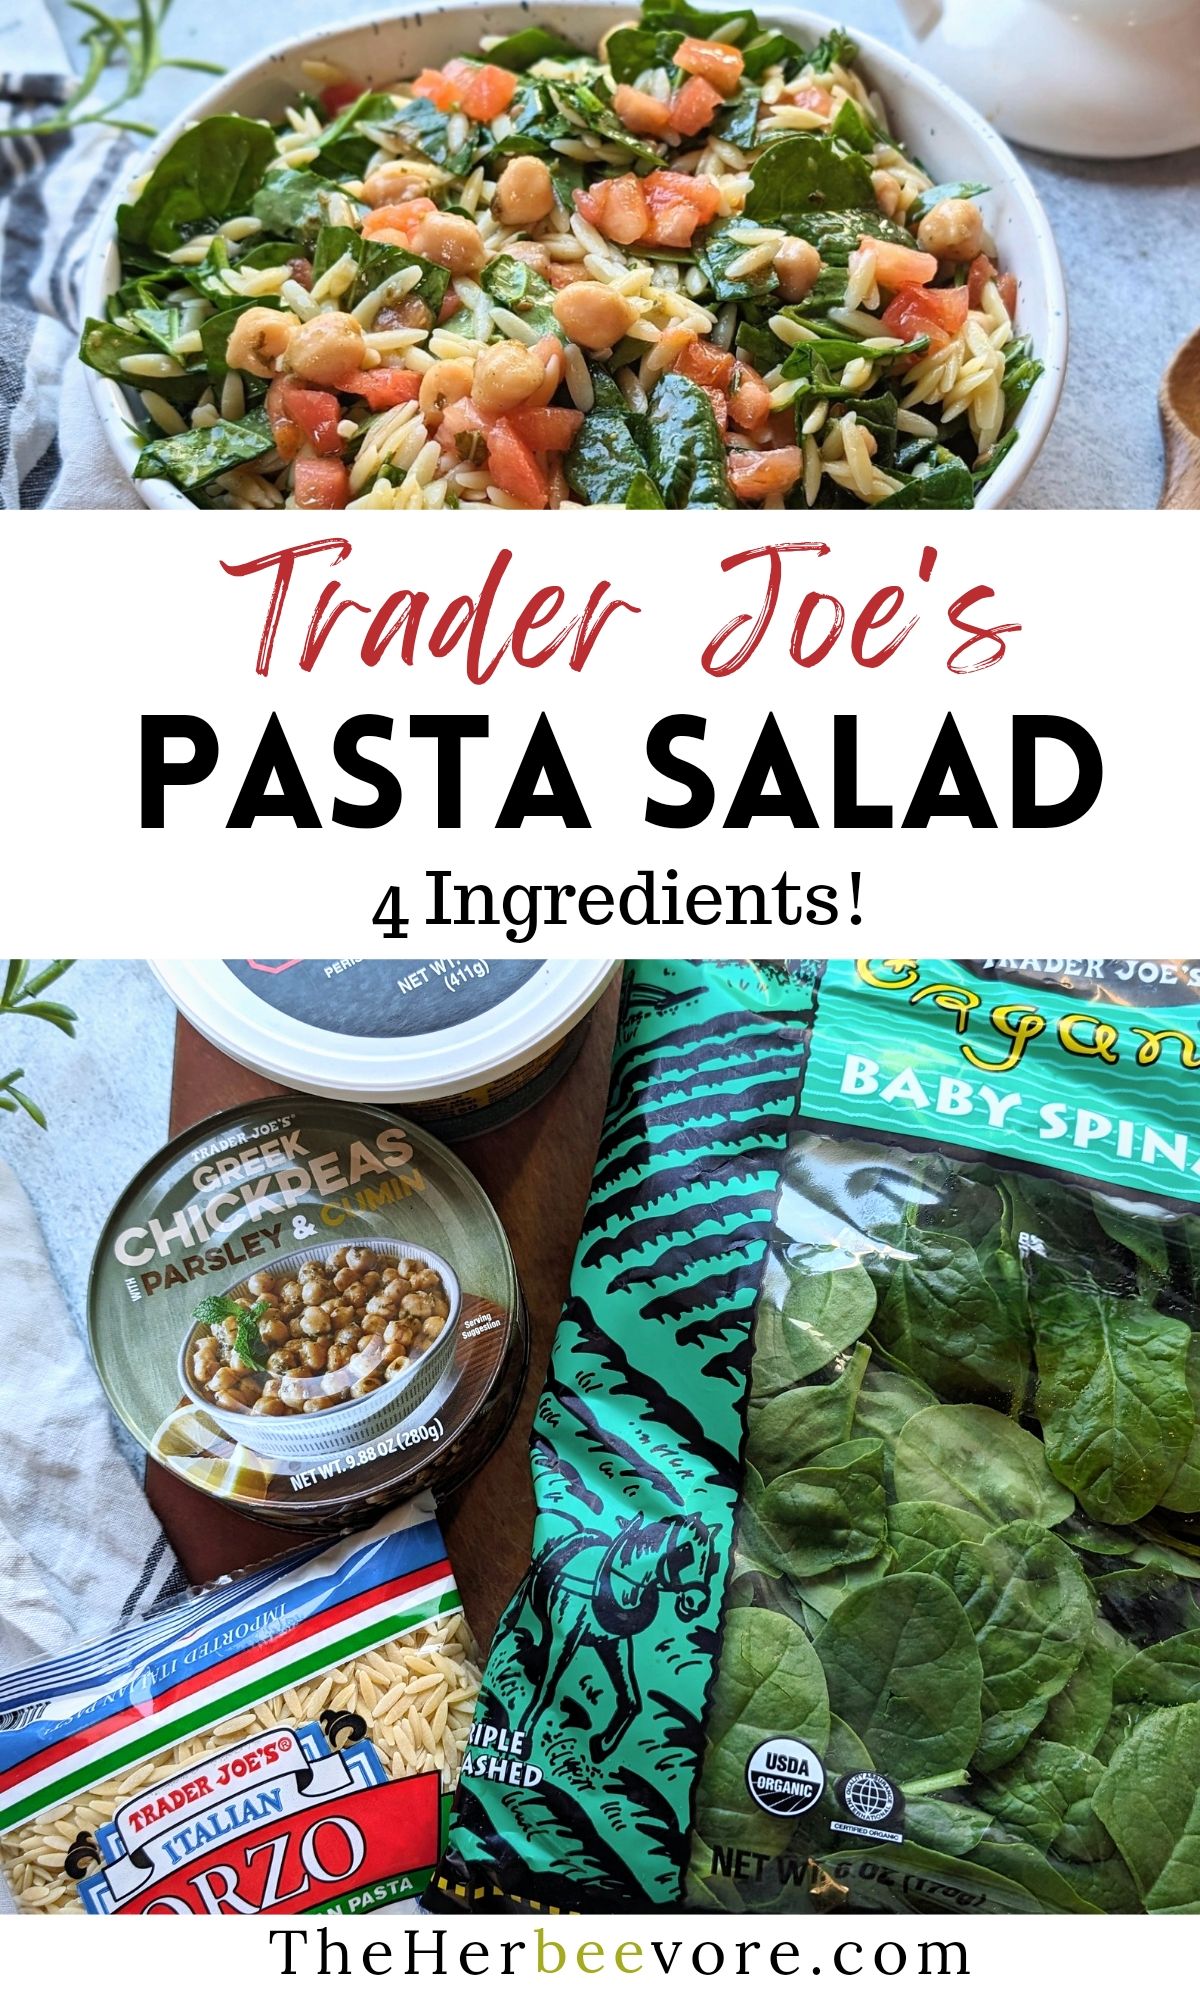 4 ingredient pasta salad recipe Trader Joe's products easy healthy trader joe's meals and recipe ideas